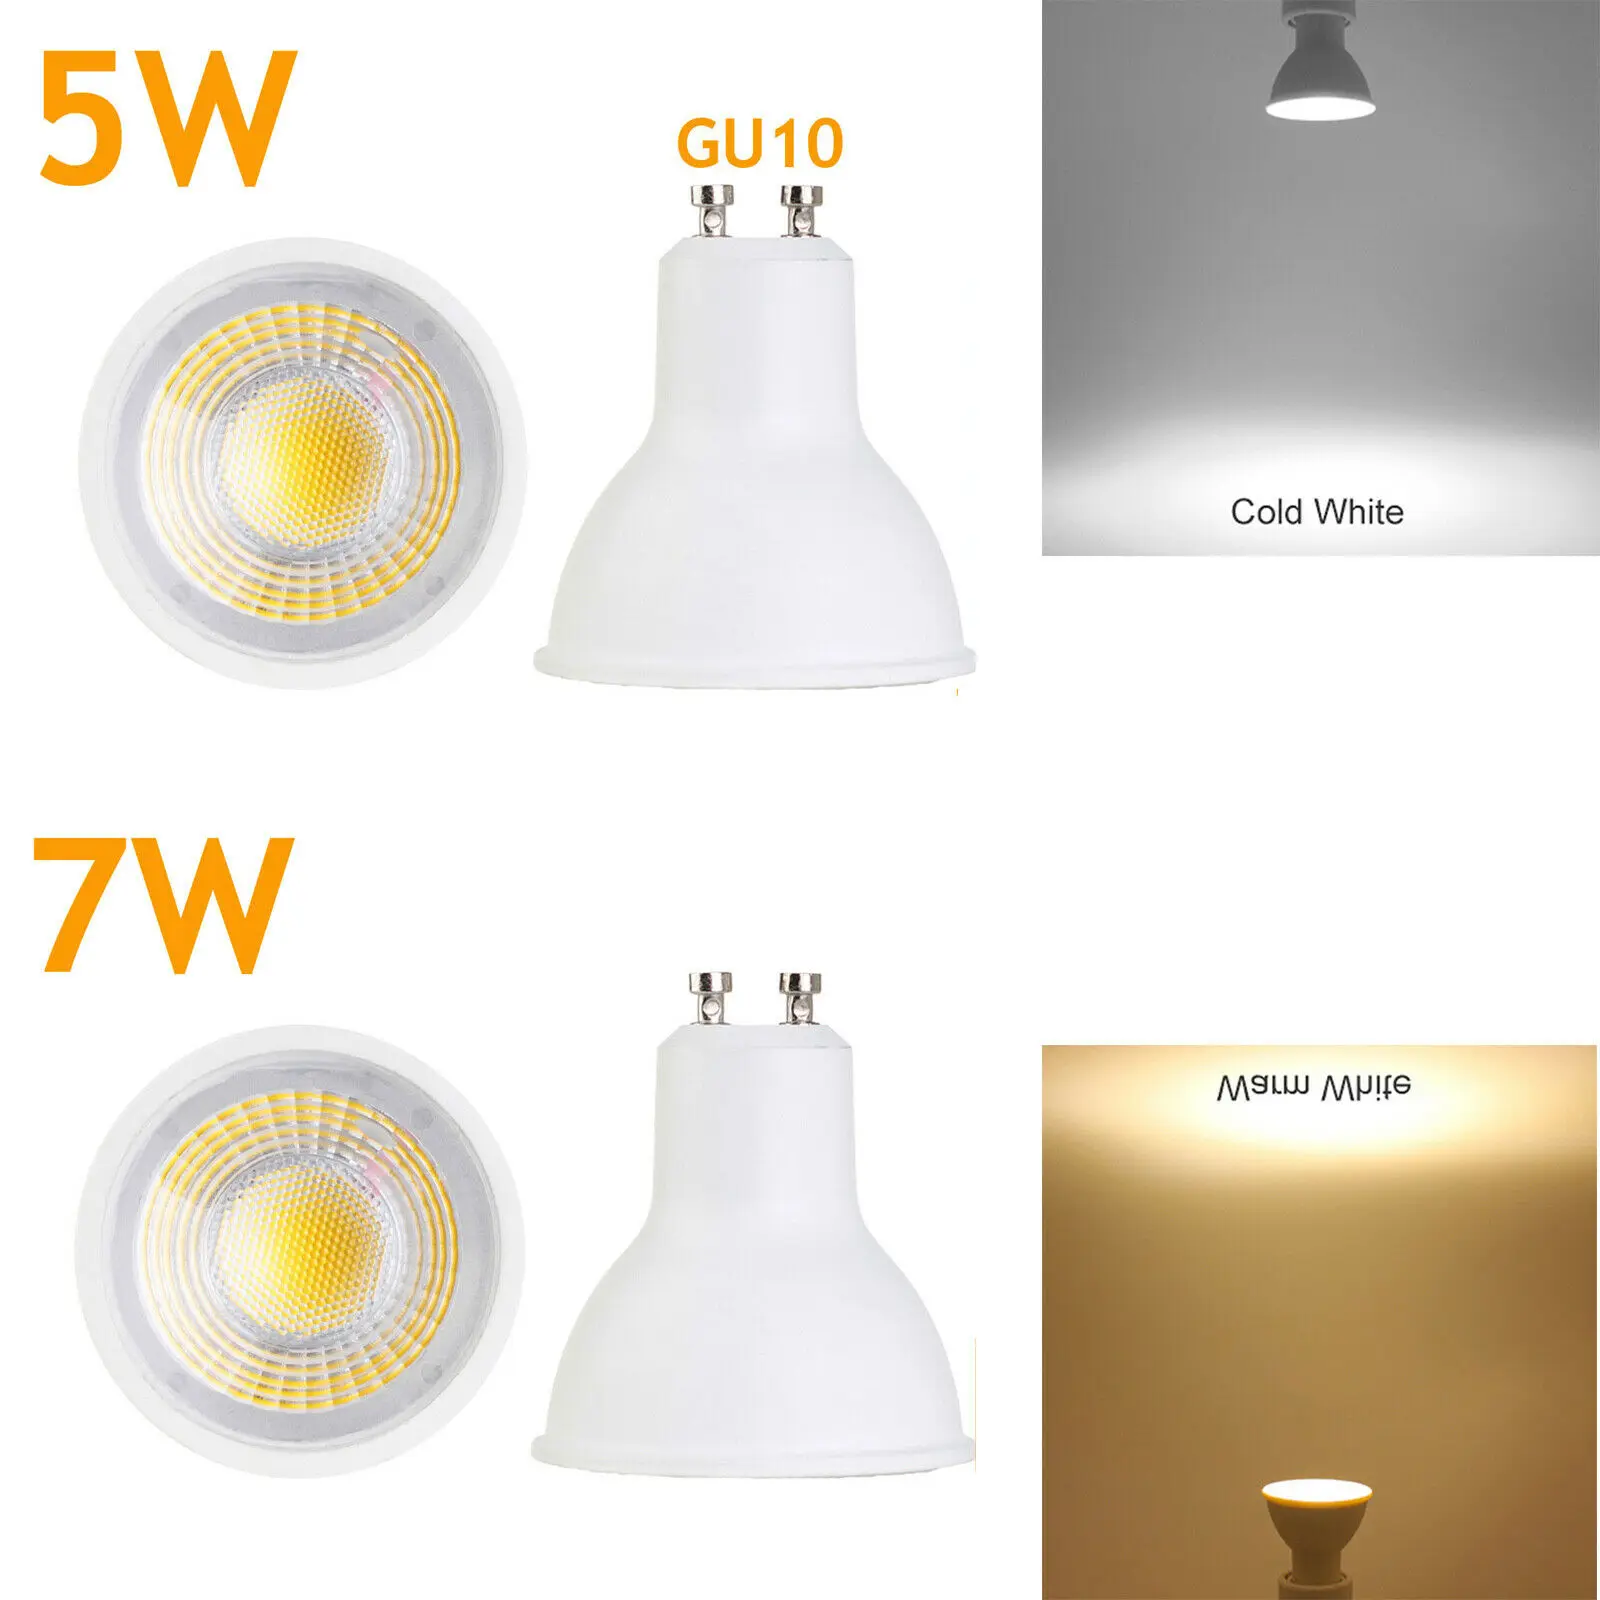 

10PCs LED Spotlight 5W 7W GU10 GU5.3 MR16 COB 110V 220V DC12V Spolight Lamp Bright Cool White Warm White for Home Office